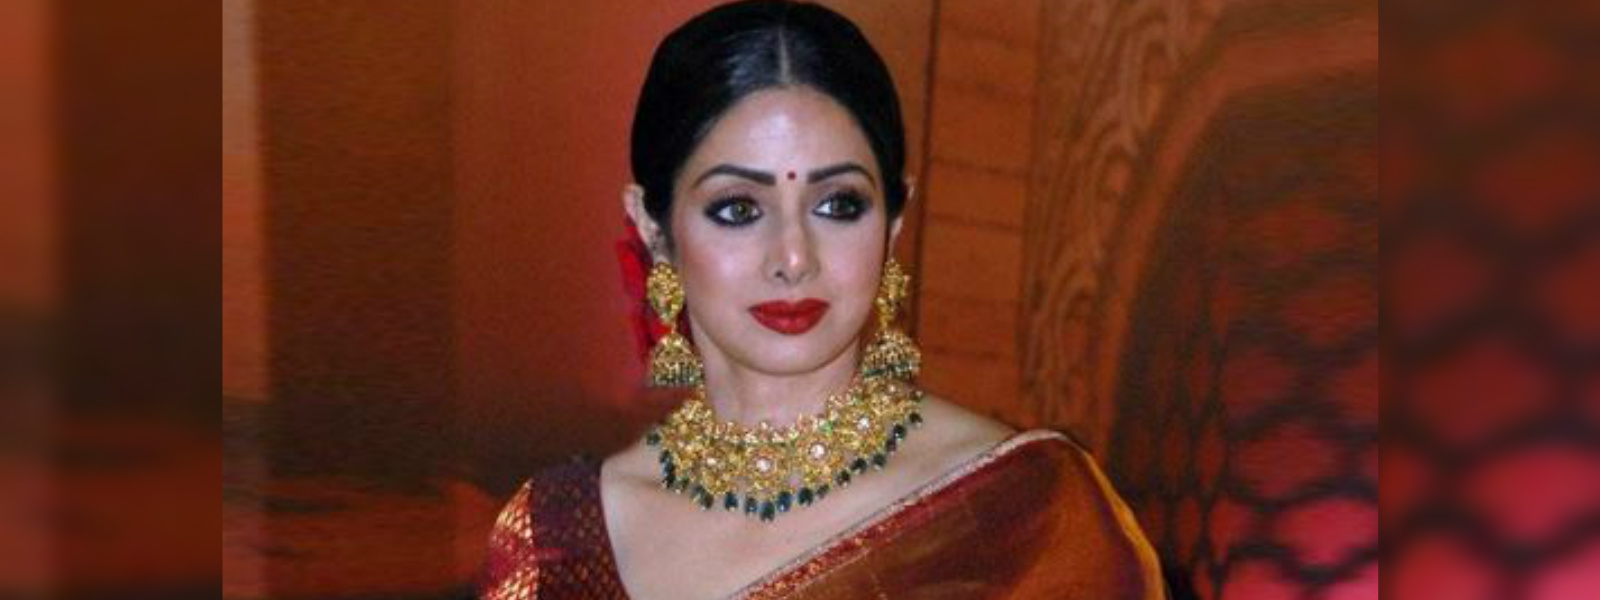 India women pay tribute to Bollywood star Sridevi